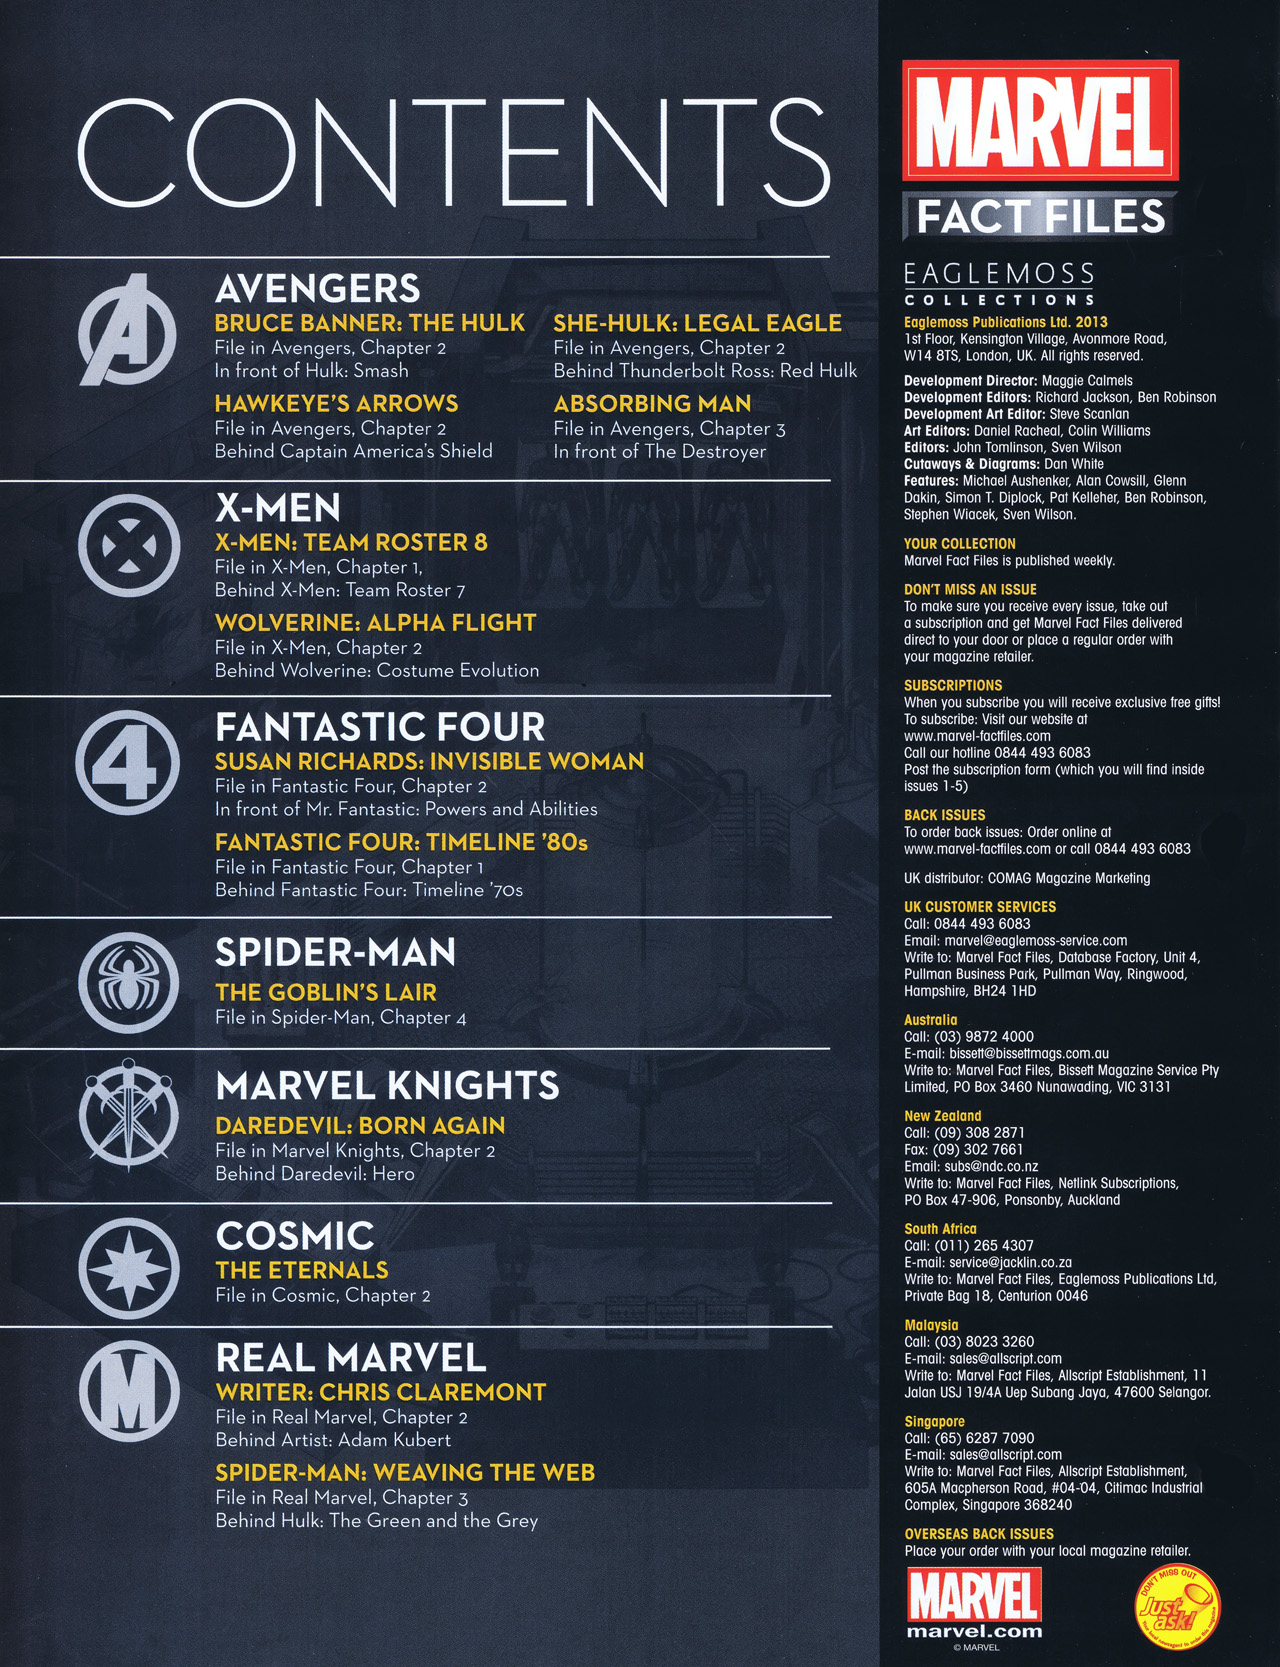 Read online Marvel Fact Files comic -  Issue #8 - 2